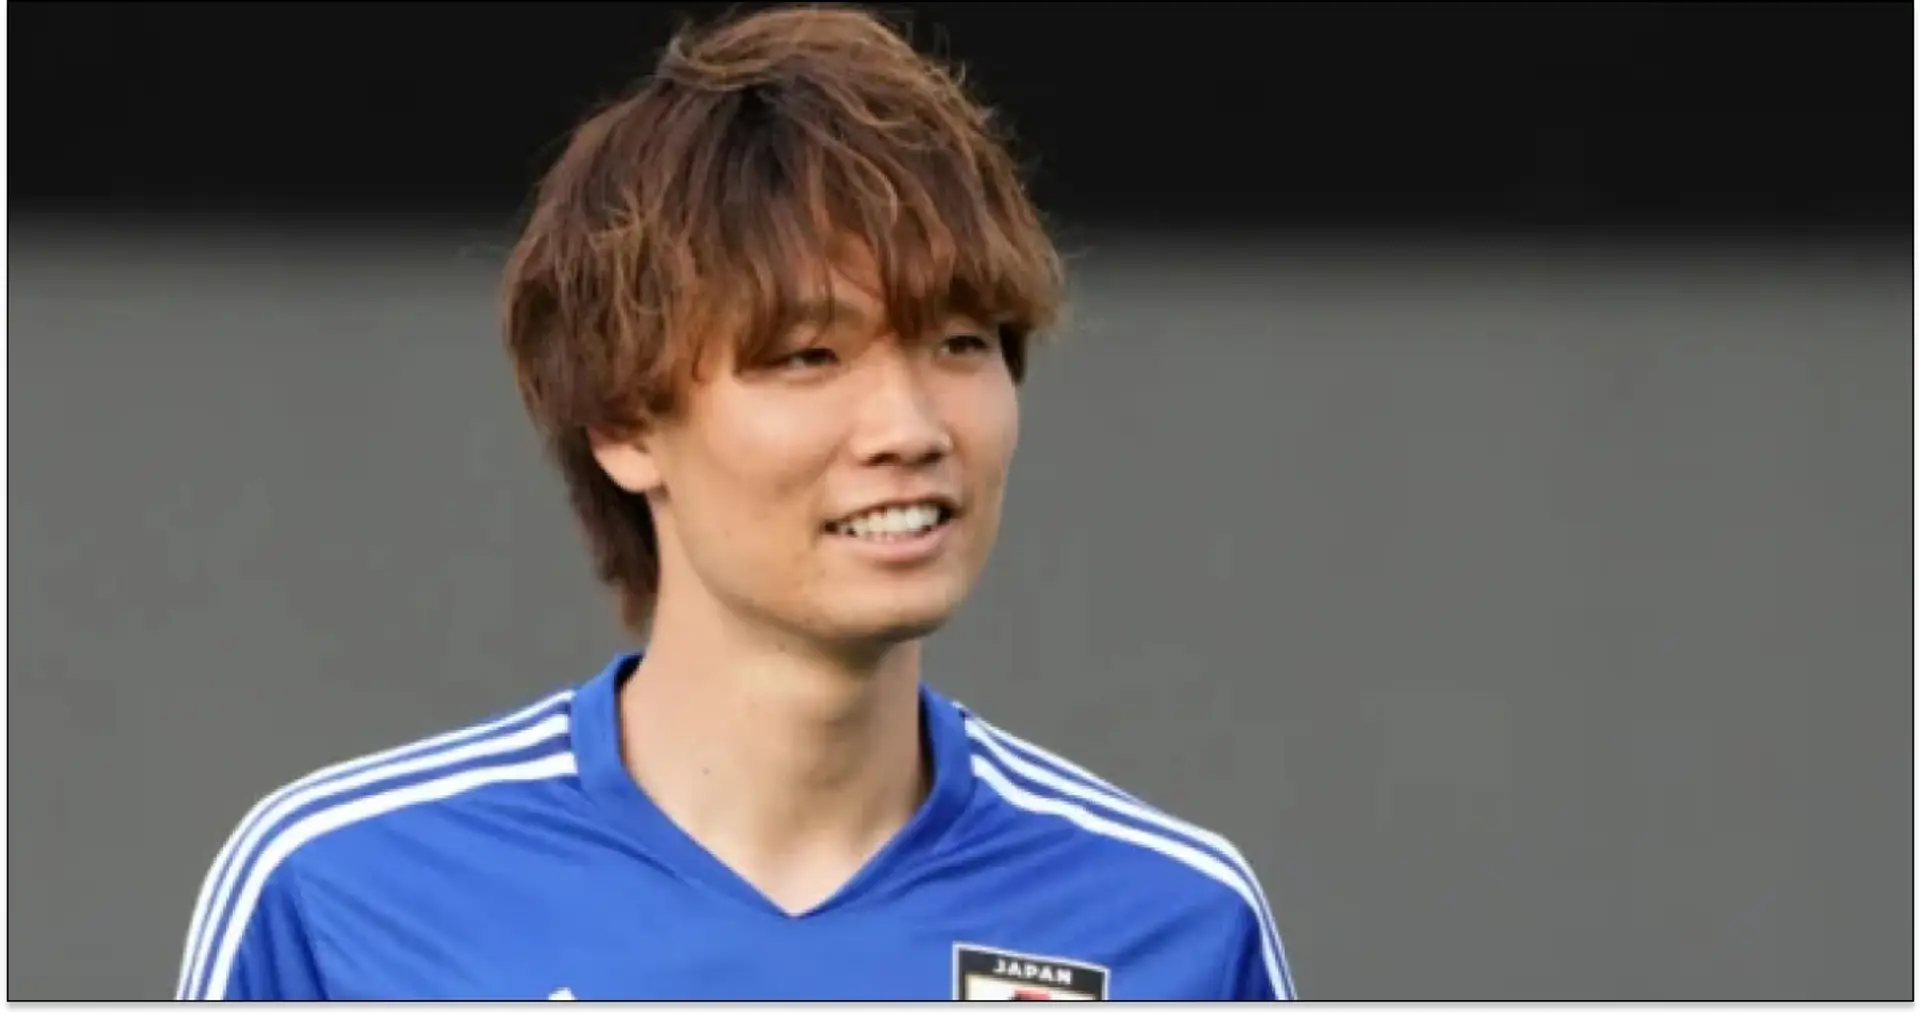 Endo's Japan teammate: Romano names player Liverpool scouted 'multiple times'